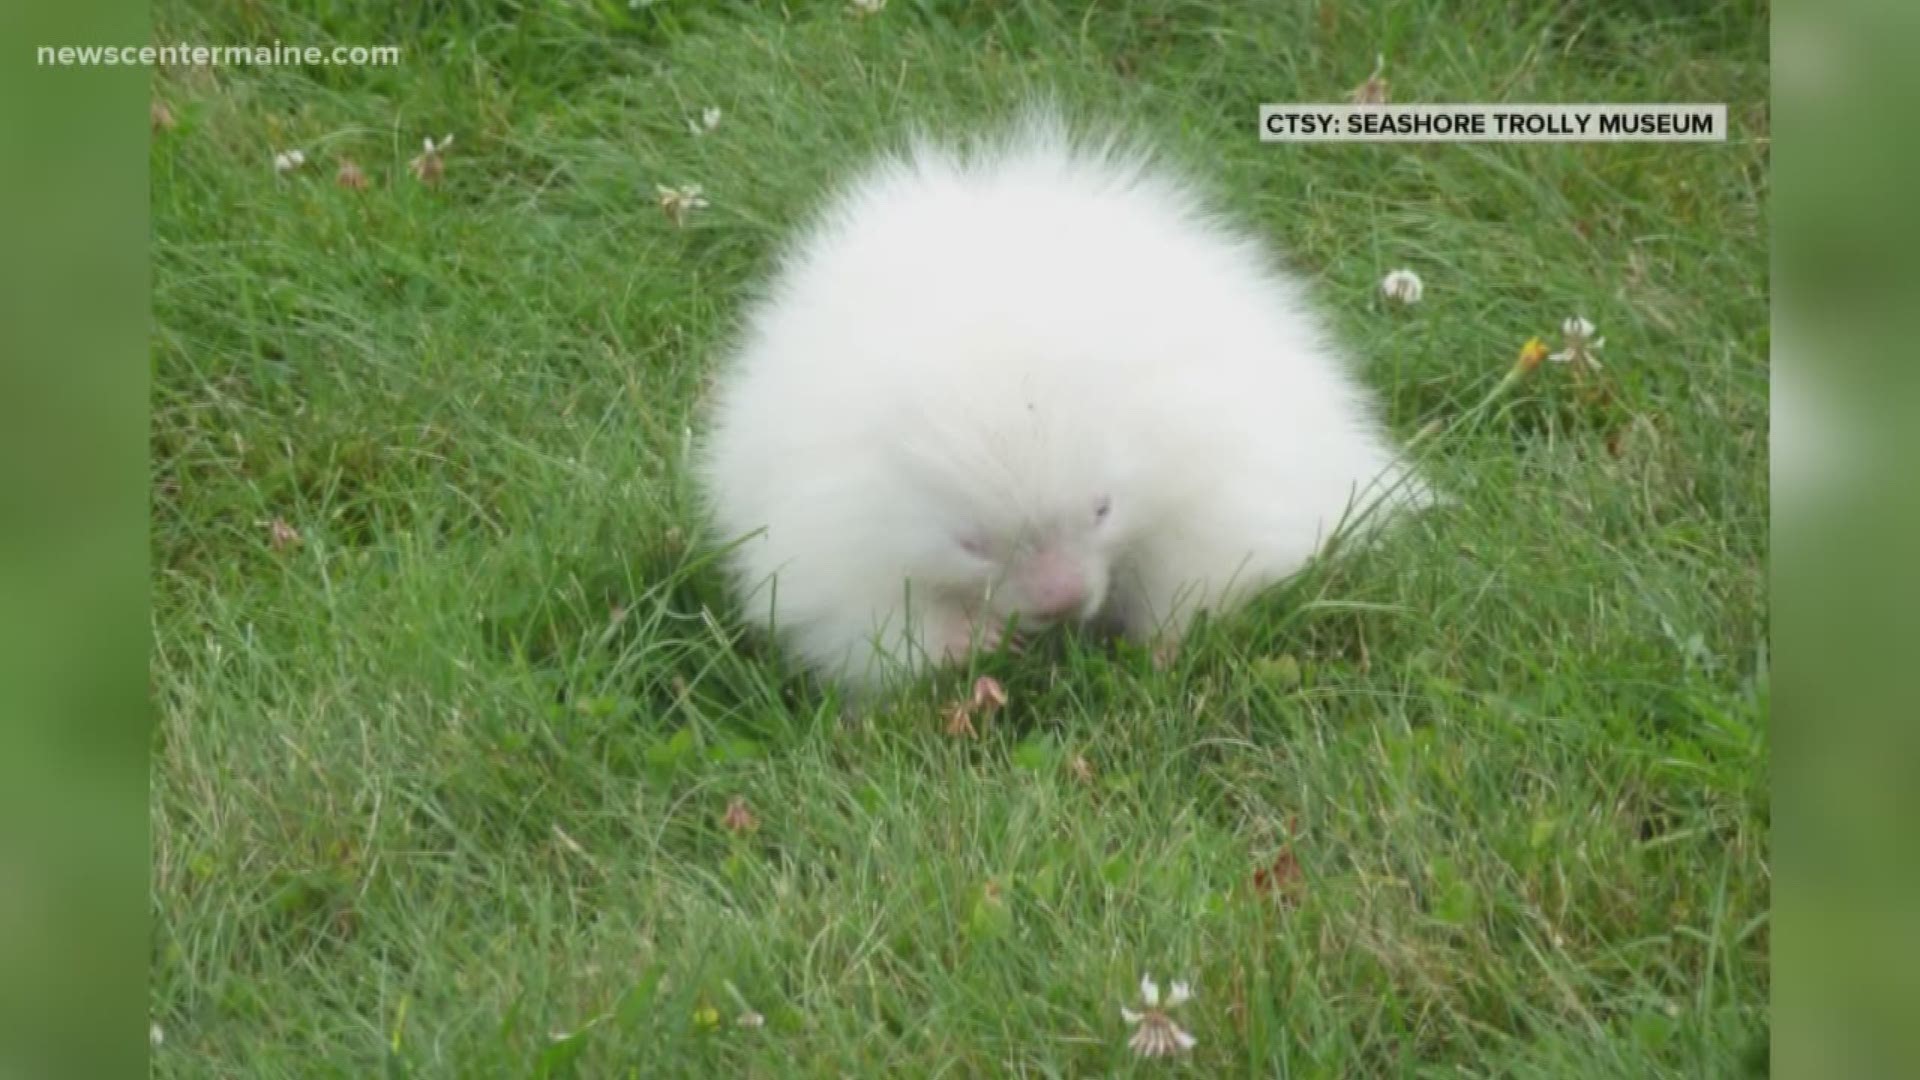 A rate albino porcupine was spotted at the Seashore Trolley Museum in Kennebunkport on Tuesday.